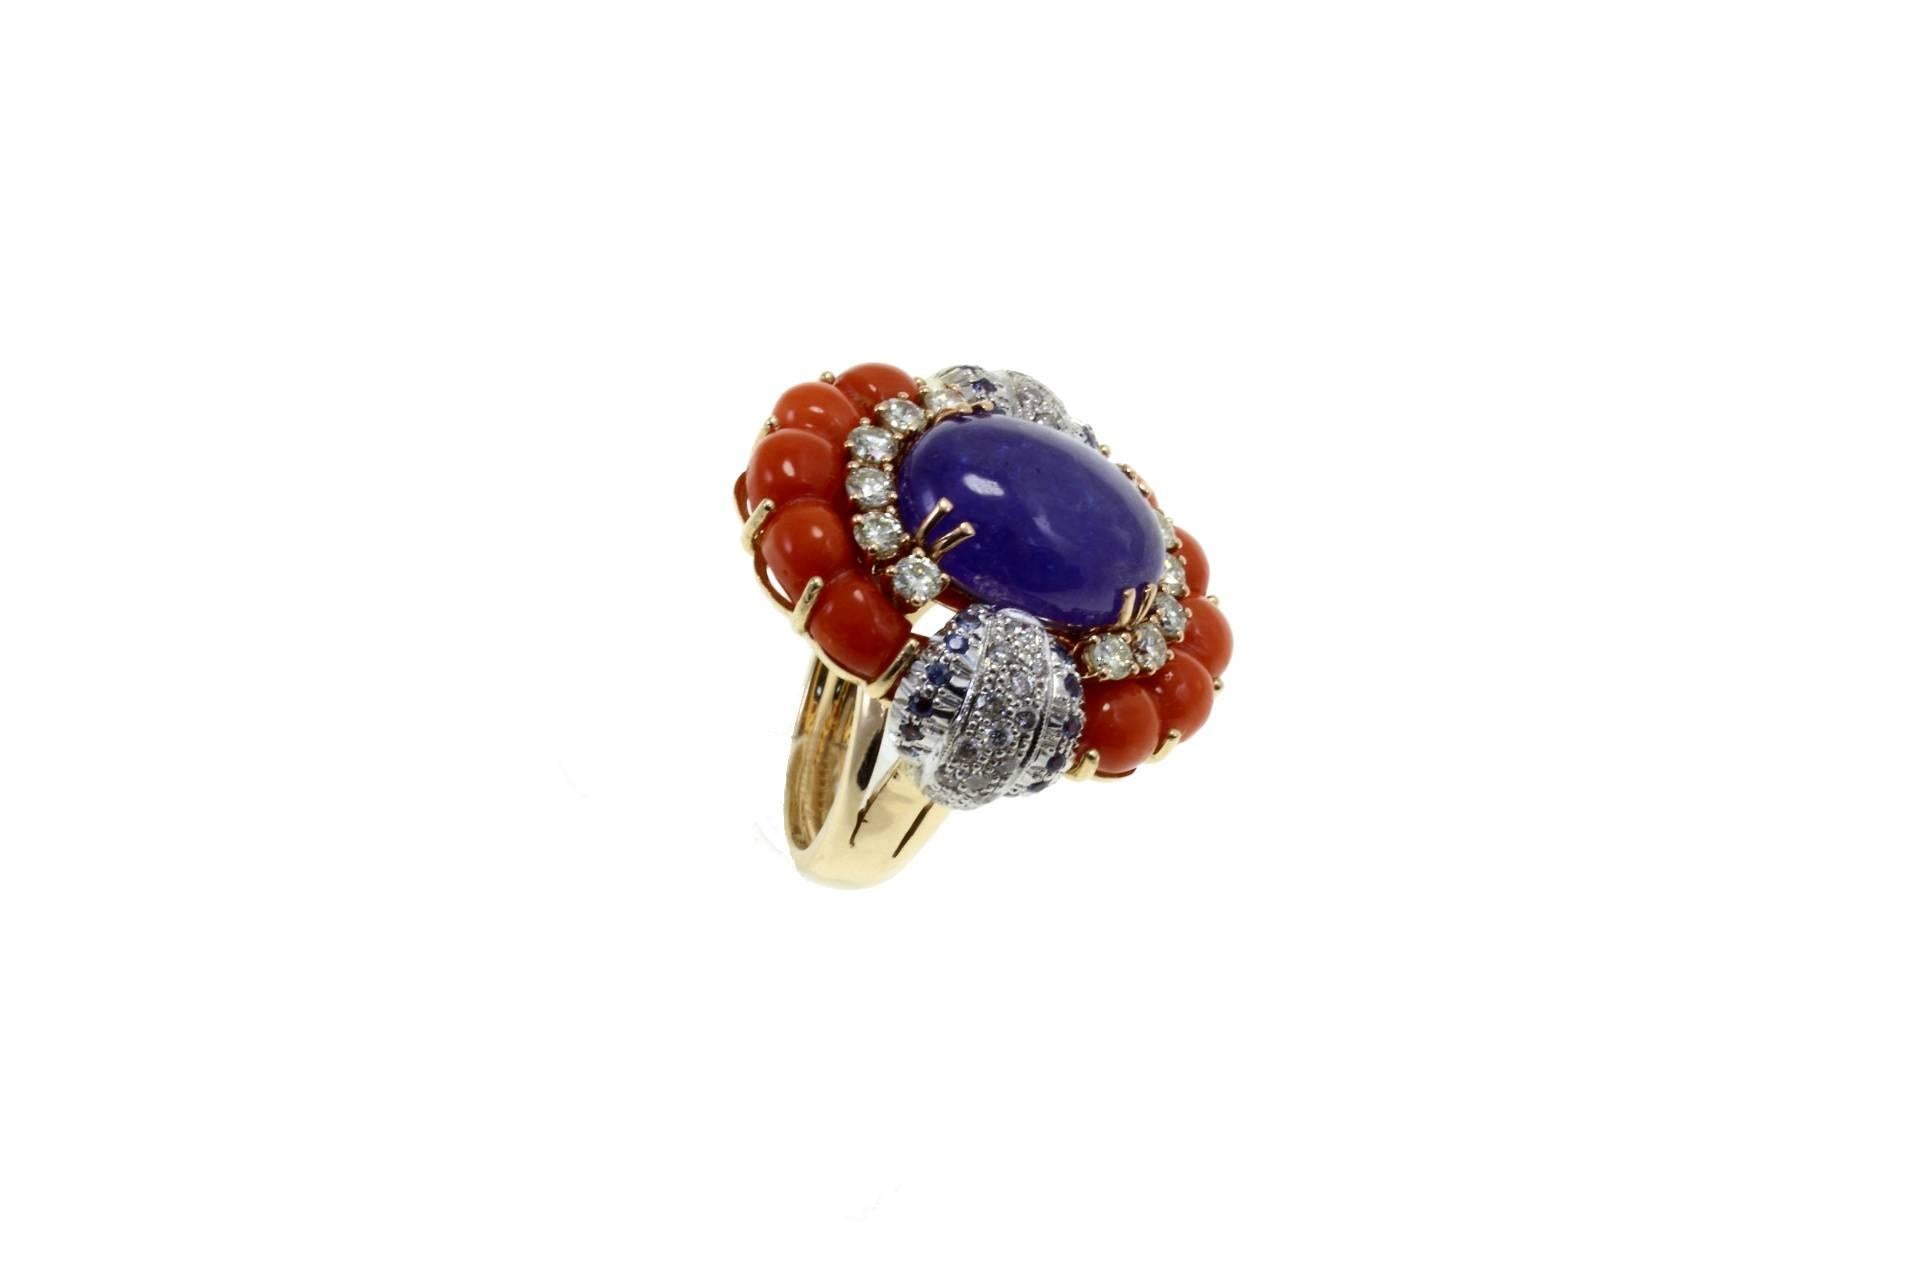 Cocktail ring in 14kt yellow and white gold composed of a central tanzanite surrounded by diamonds and coral embellished with blue sapphire stripes.

diamonds 1.9kt
sapphires 0.48kt
tot weight 20.4gr
r.f.  iegi